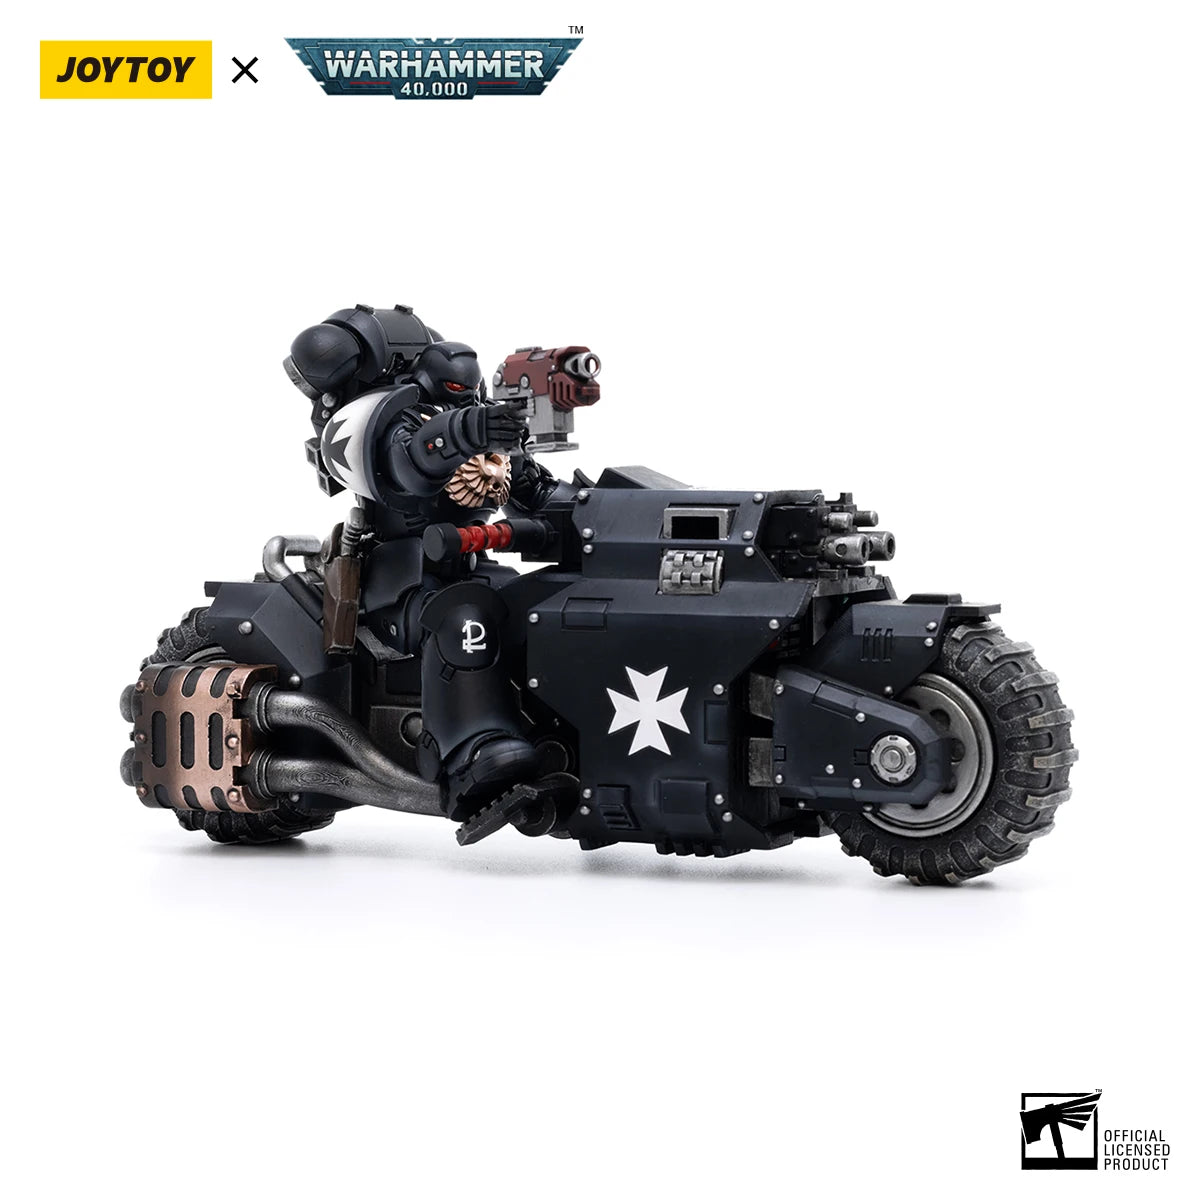 JOYTOY 1/18 figurine Warhammer 40K templiers noirs Outriders Collection Anime modèle militaire